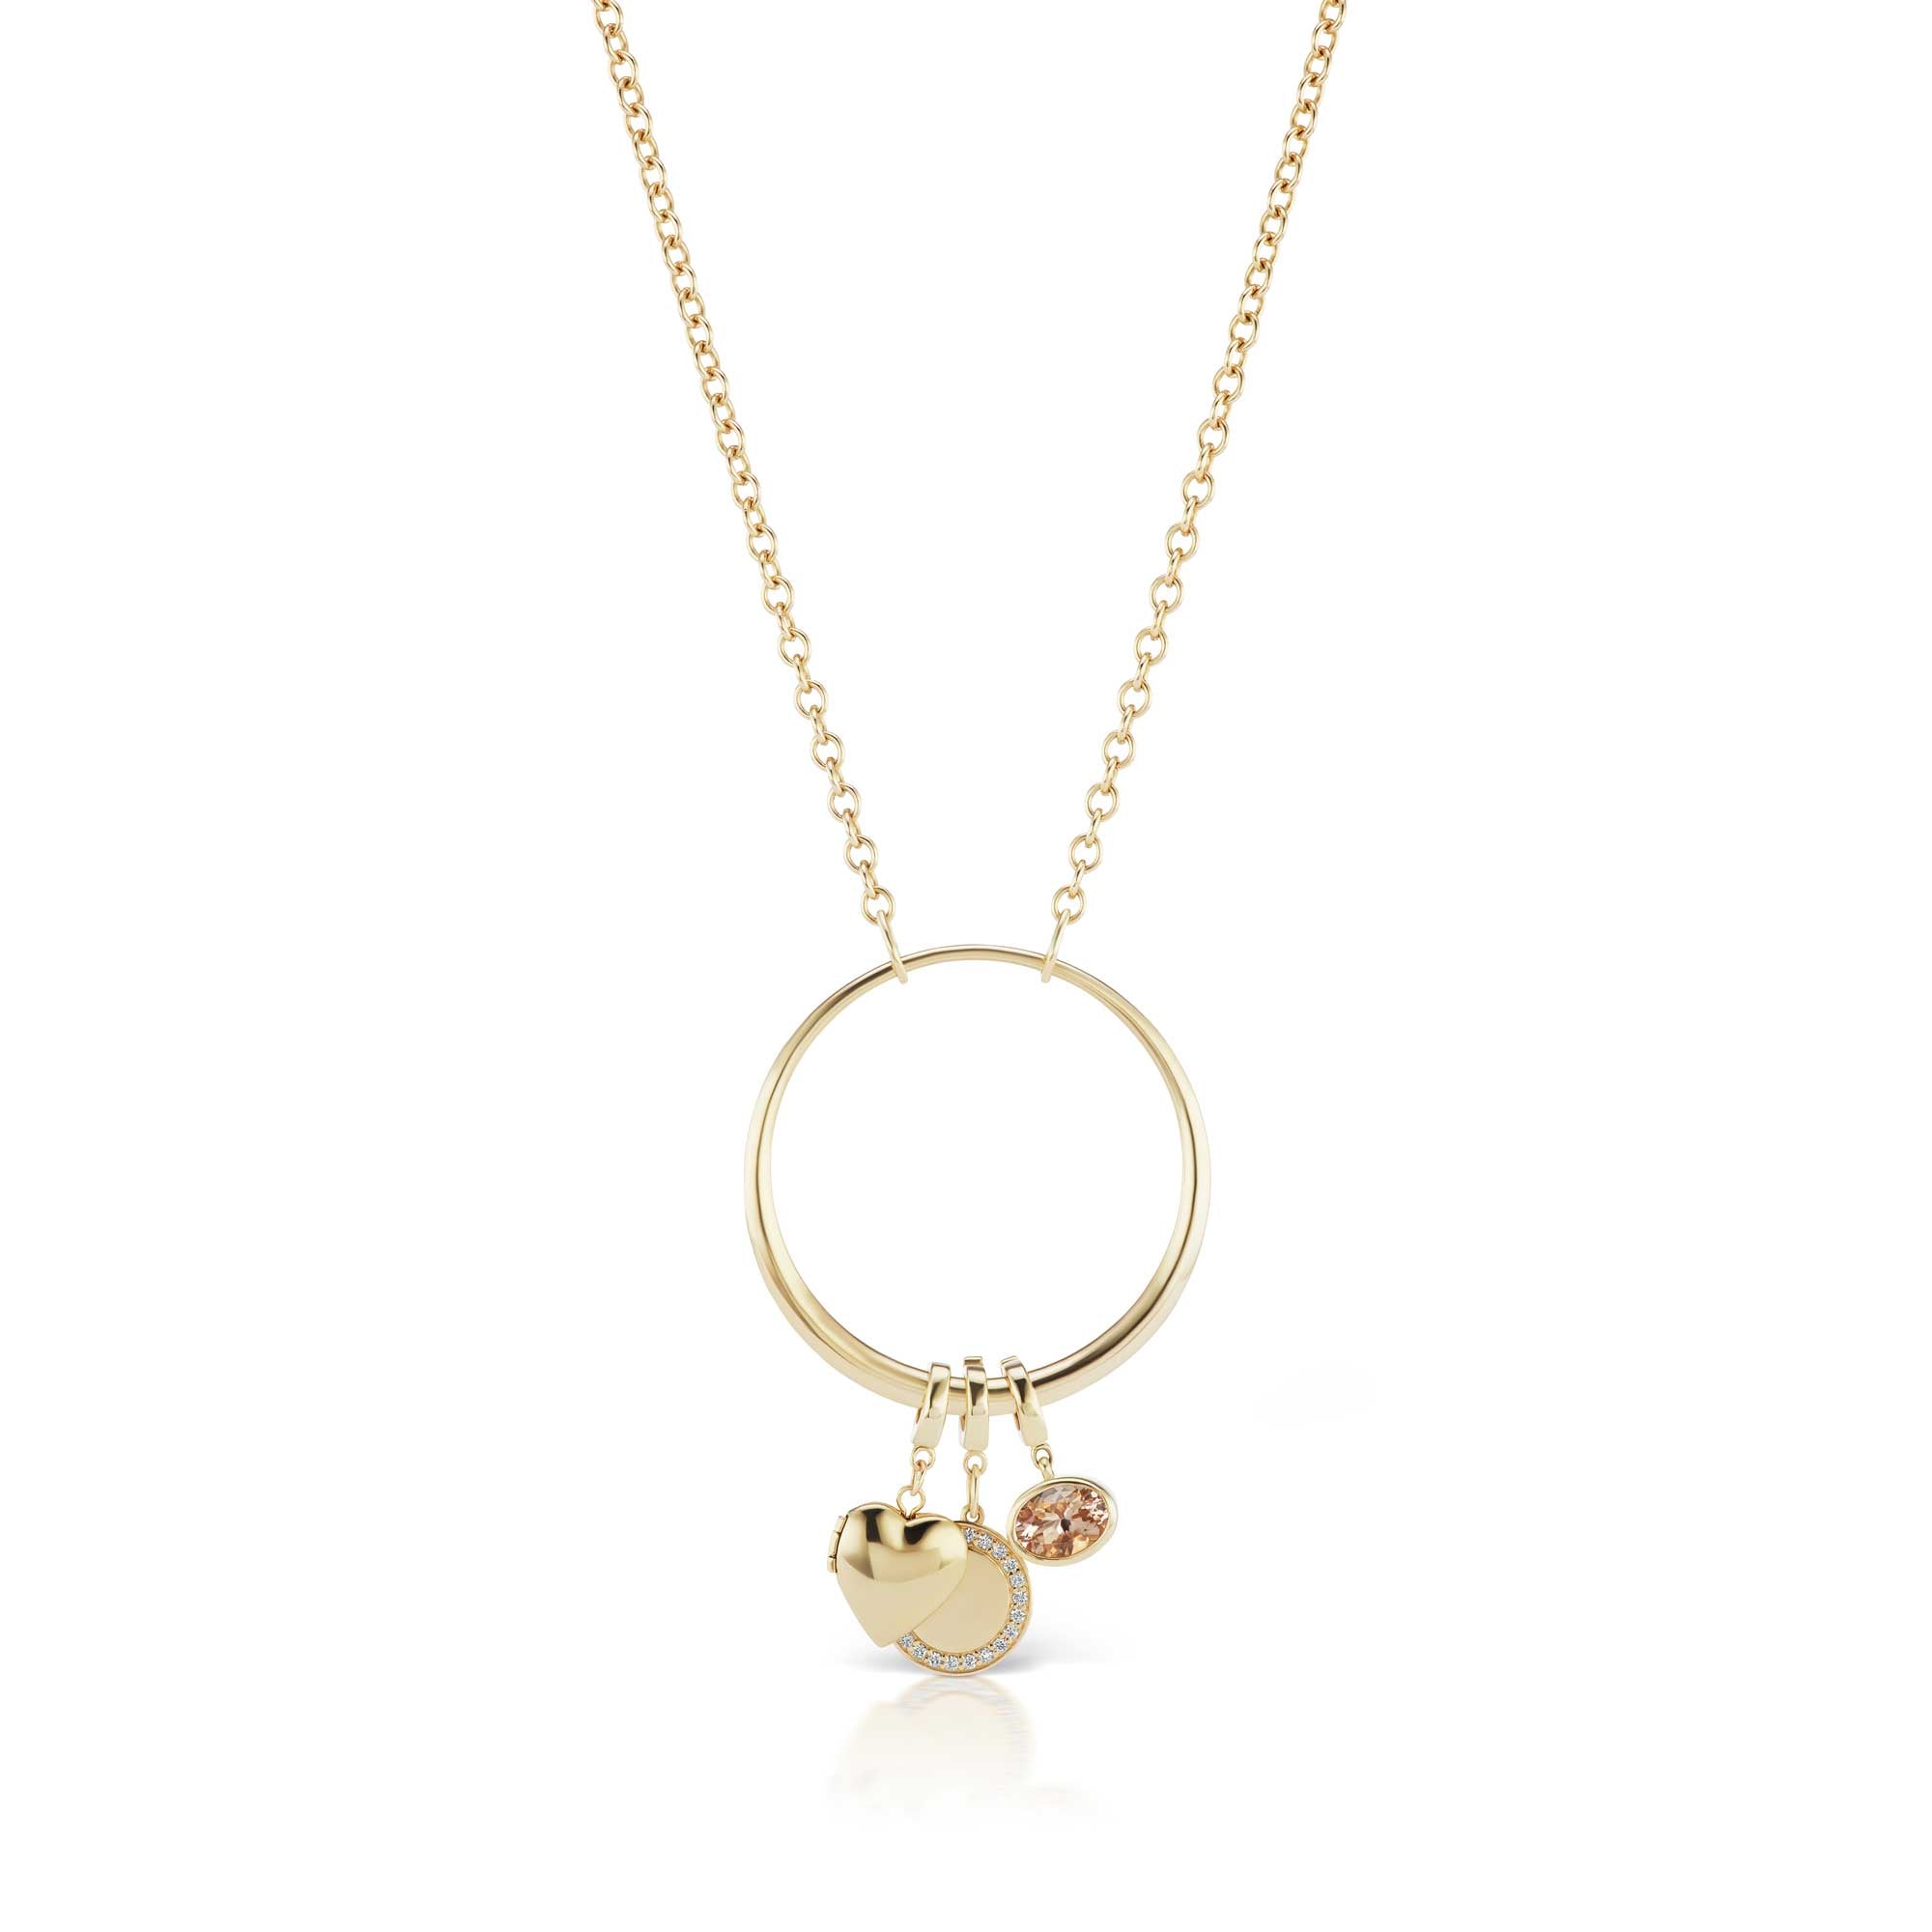 The Gold Loop Necklace